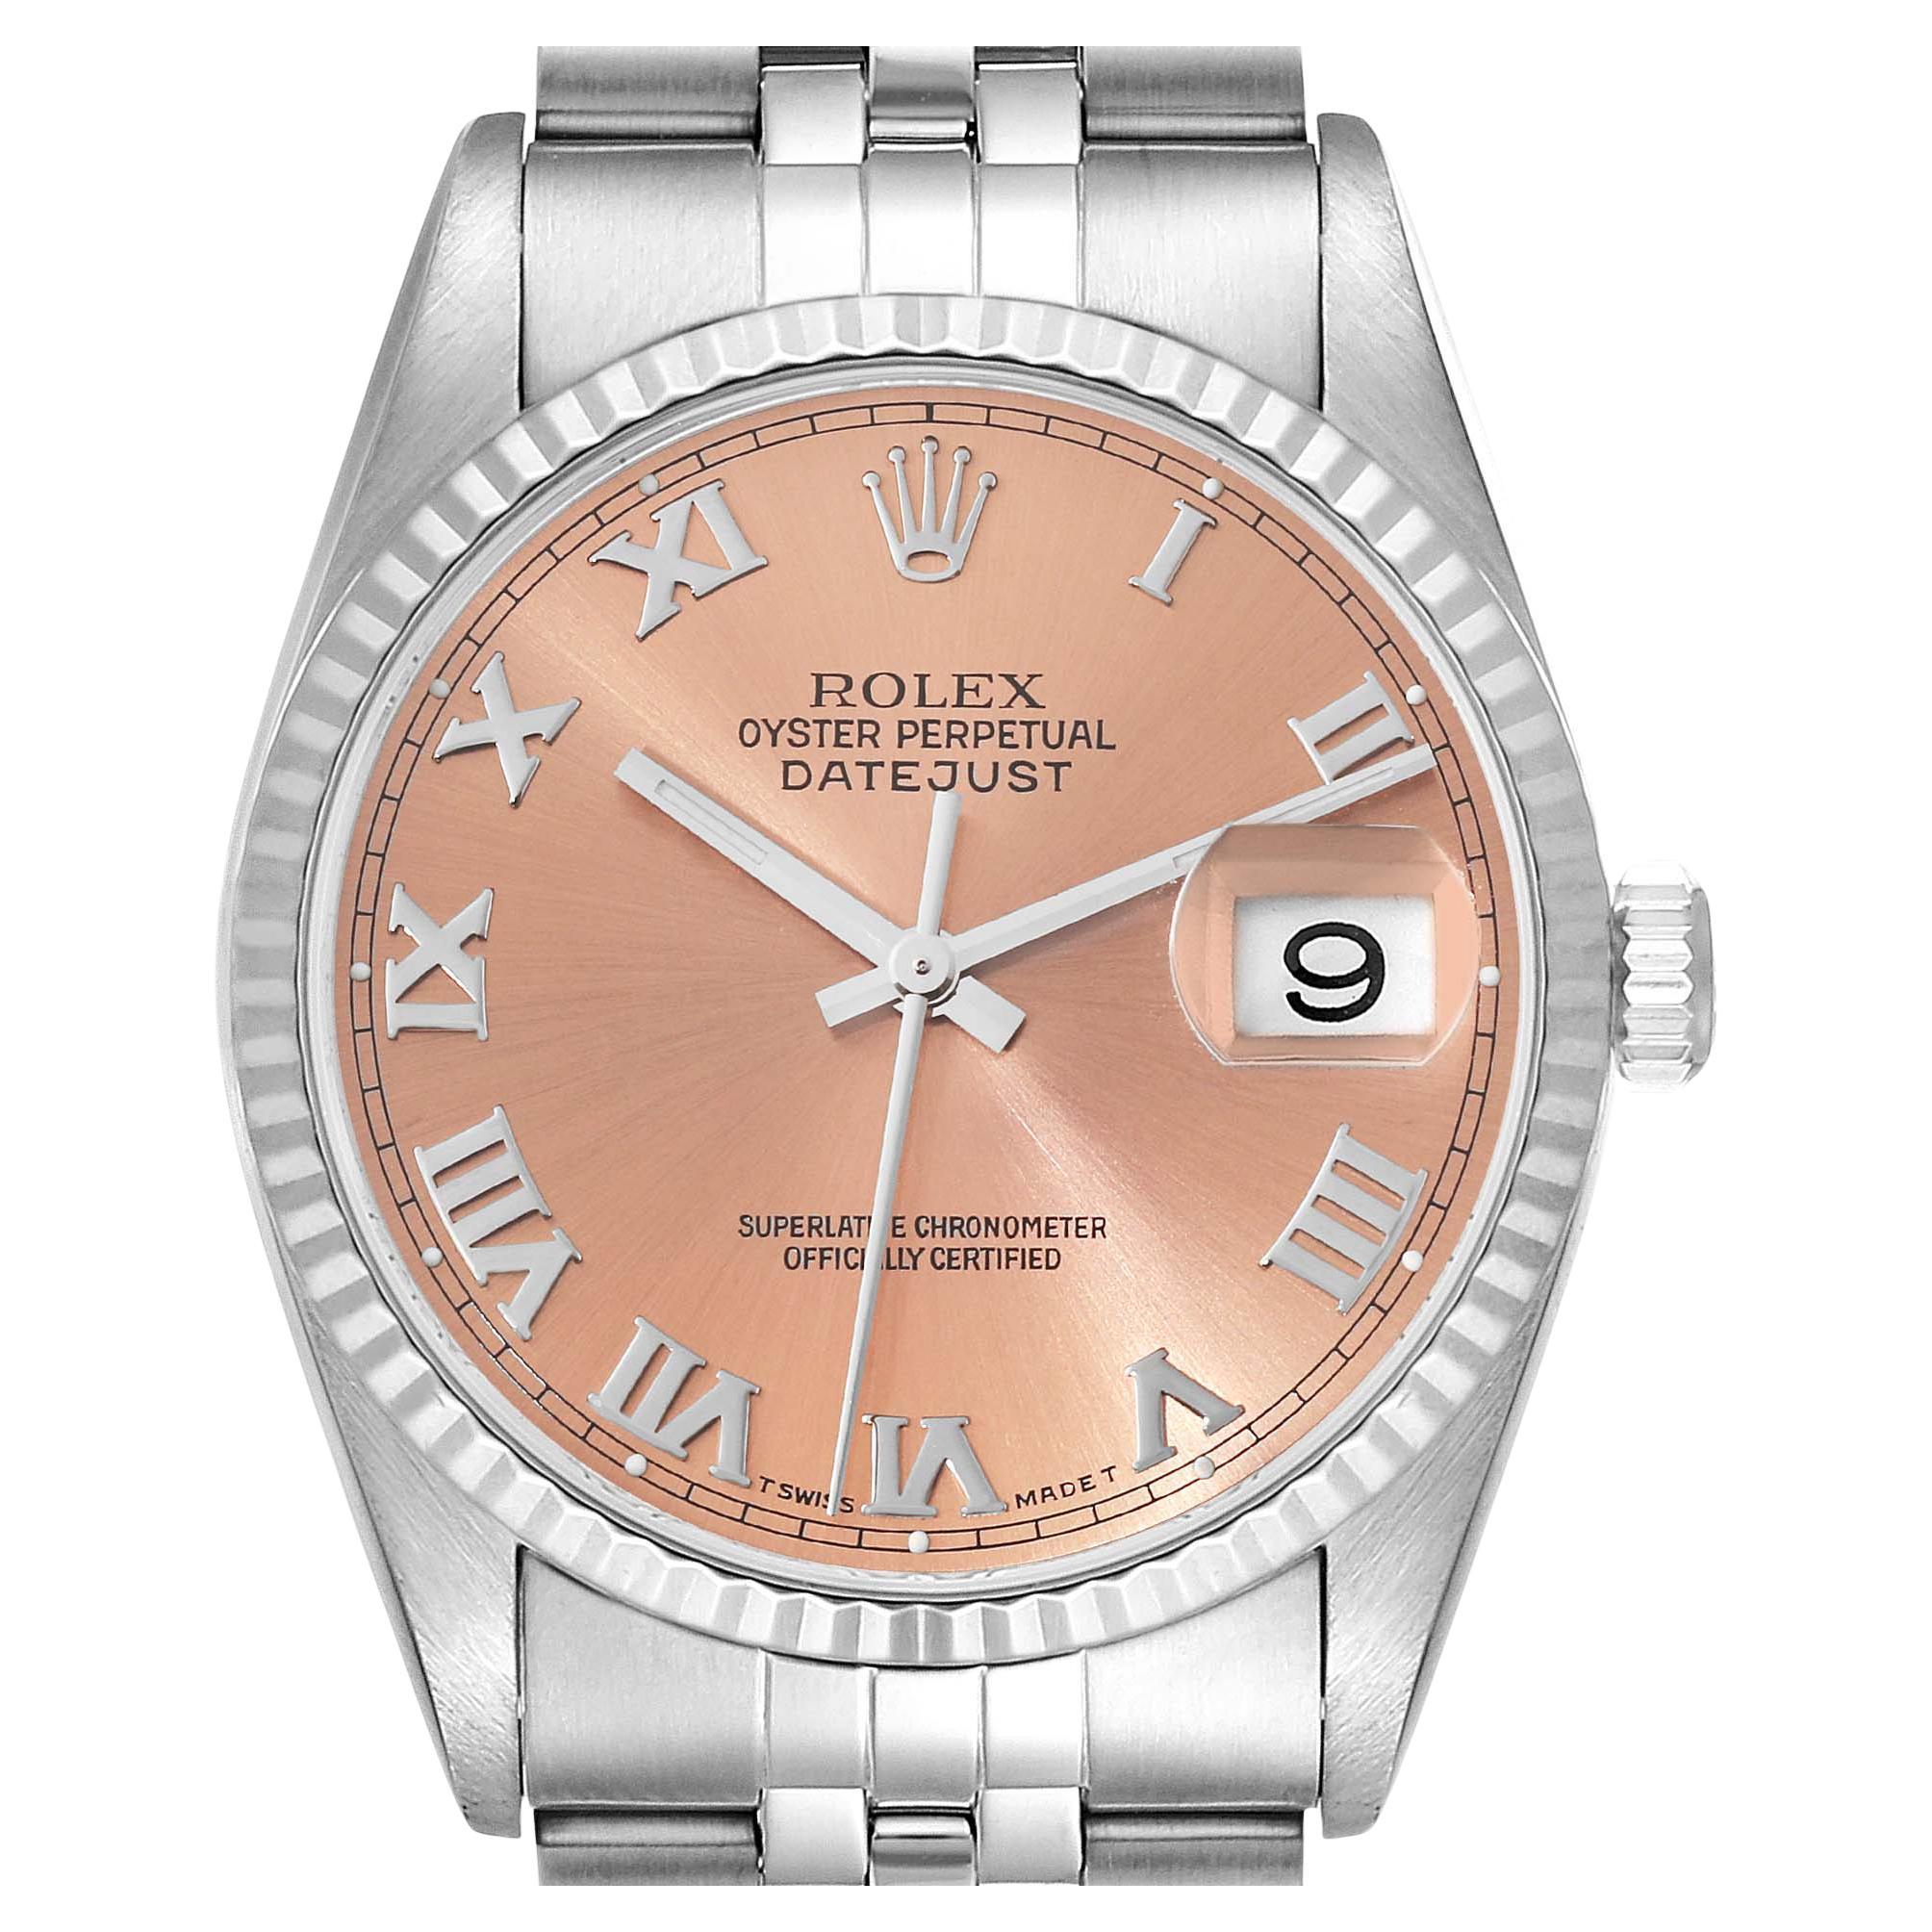 Rolex Datejust 36 Steel White Gold Salmon Roman Dial Mens Watch 16234 For Sale